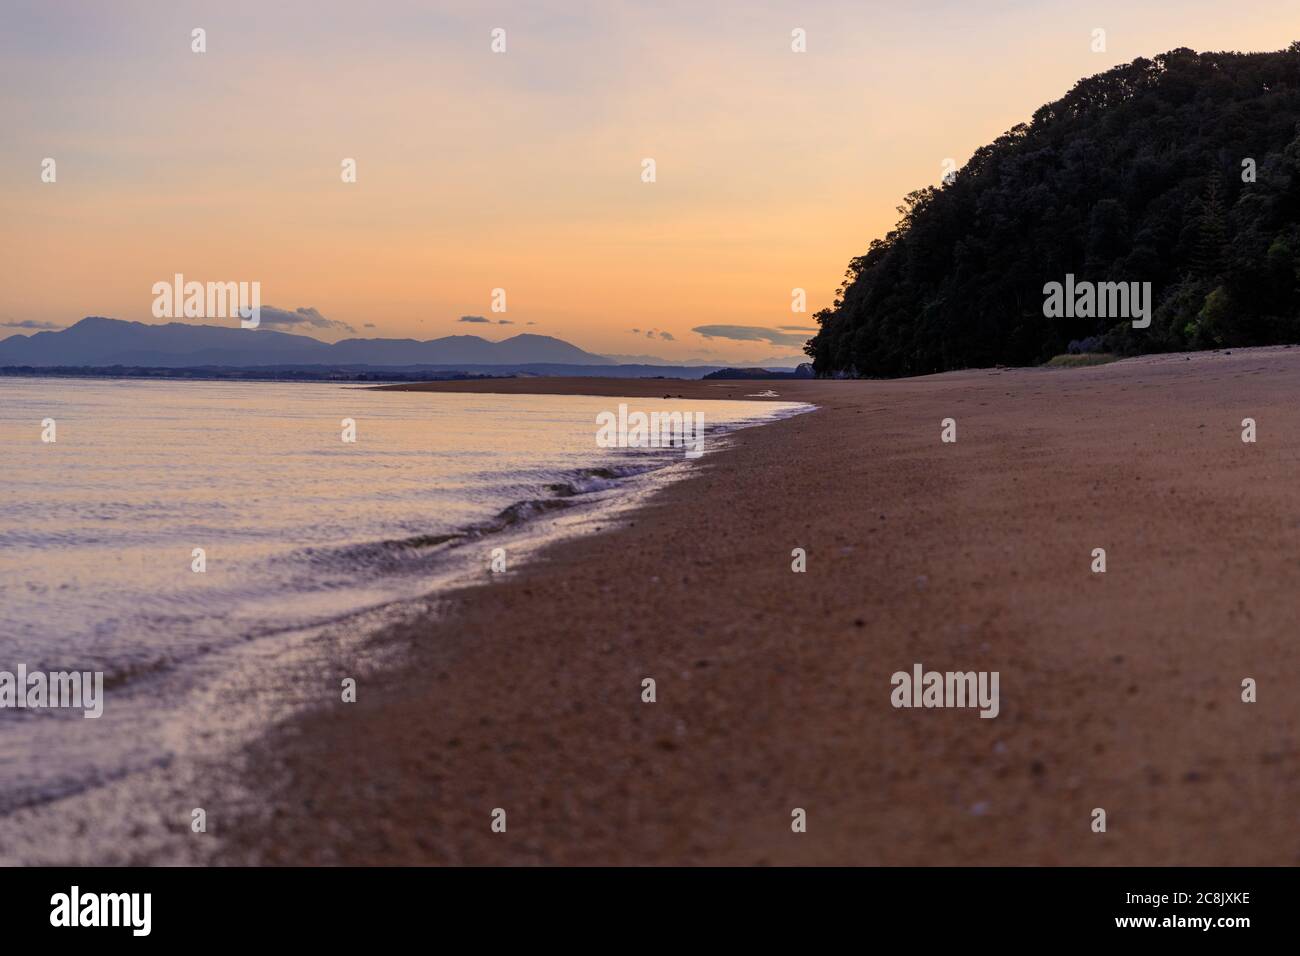 Apple Tree Bay, a beach in Abel Tasman National Park and one of the Department of Conservation, DOC, campsites. Abel Tasman, South Island, New Zealand Stock Photo